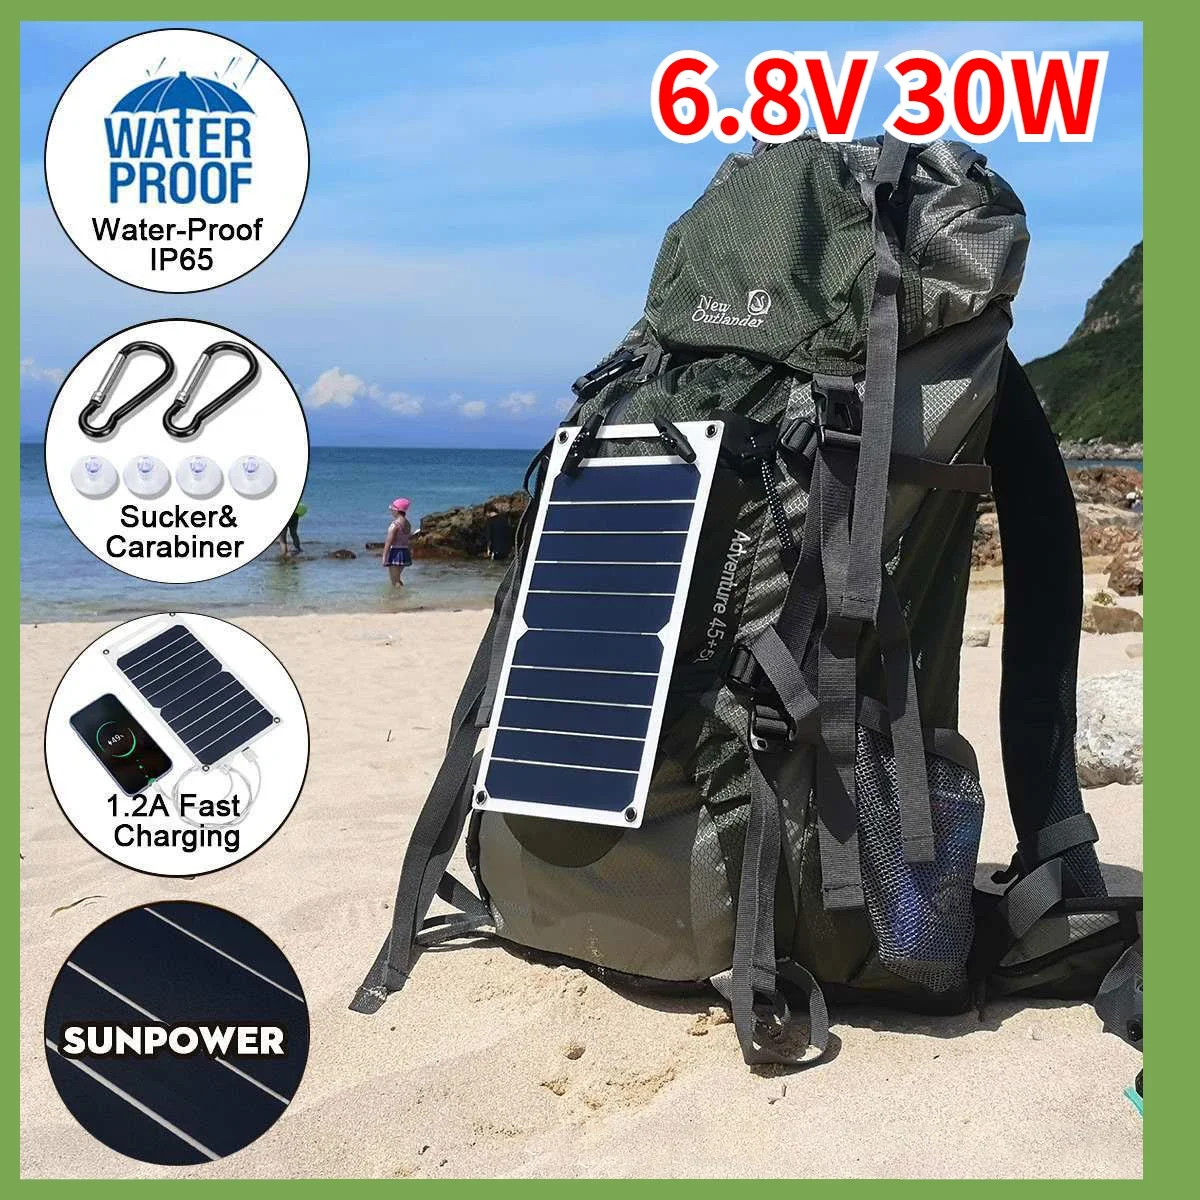 

Solar Panel 30W With USB Waterproof Outdoor Hiking And Camping Portable Battery Mobile Phone Charging Bank 6.8V